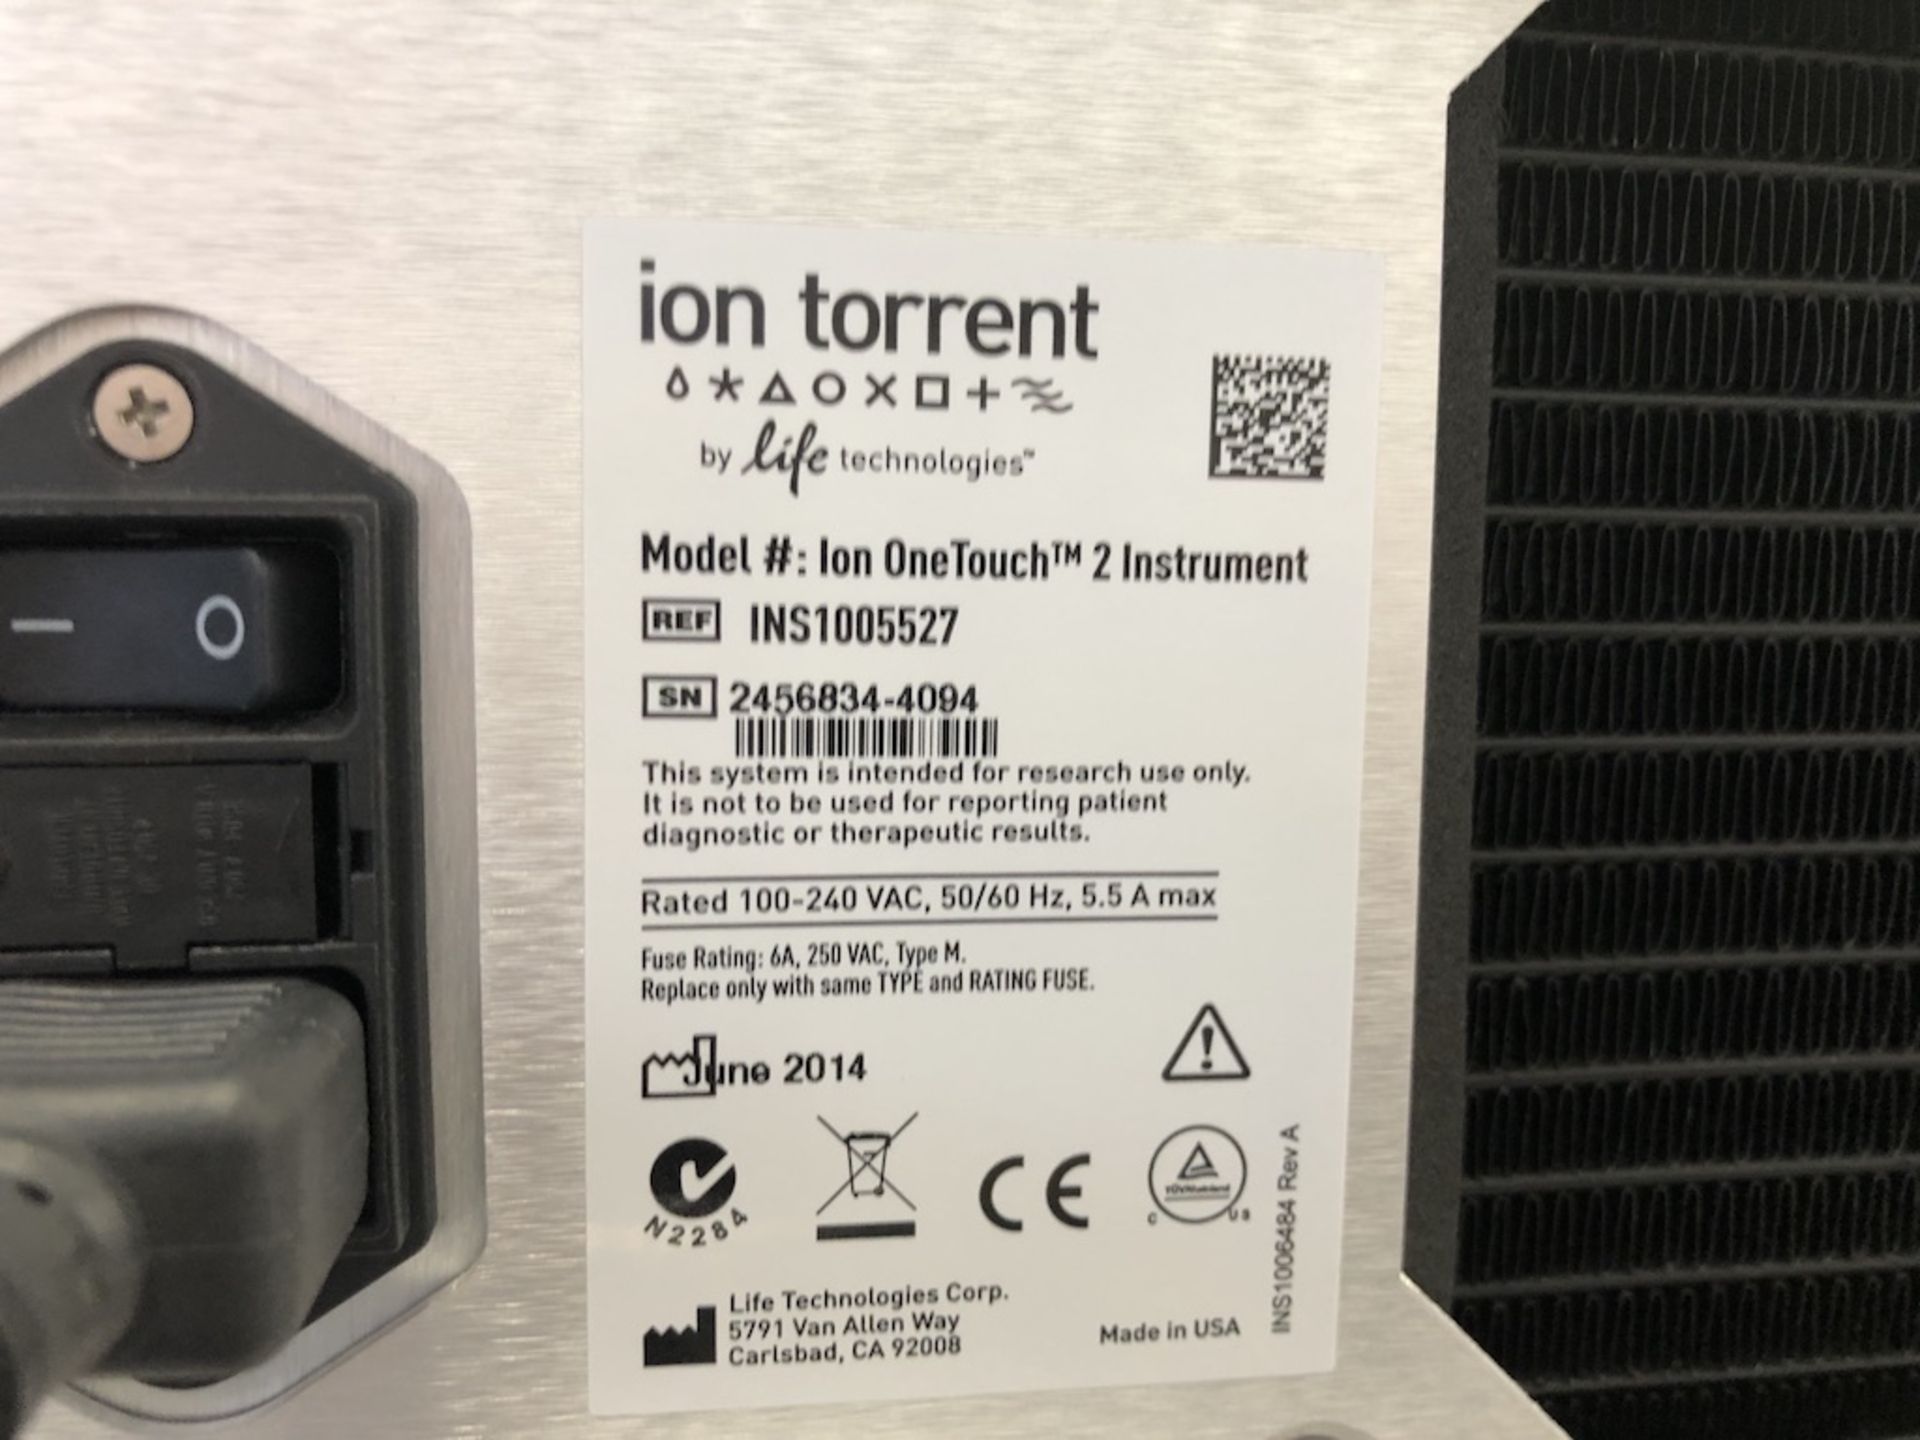 LIFE TECHNOLOGIES ION ONETOUCH 2 INSTRUMENT ION TORRENT 100-240VAC, 50/60HZ, 5.5A Ê 1218 ALDERWOOD - Image 9 of 15